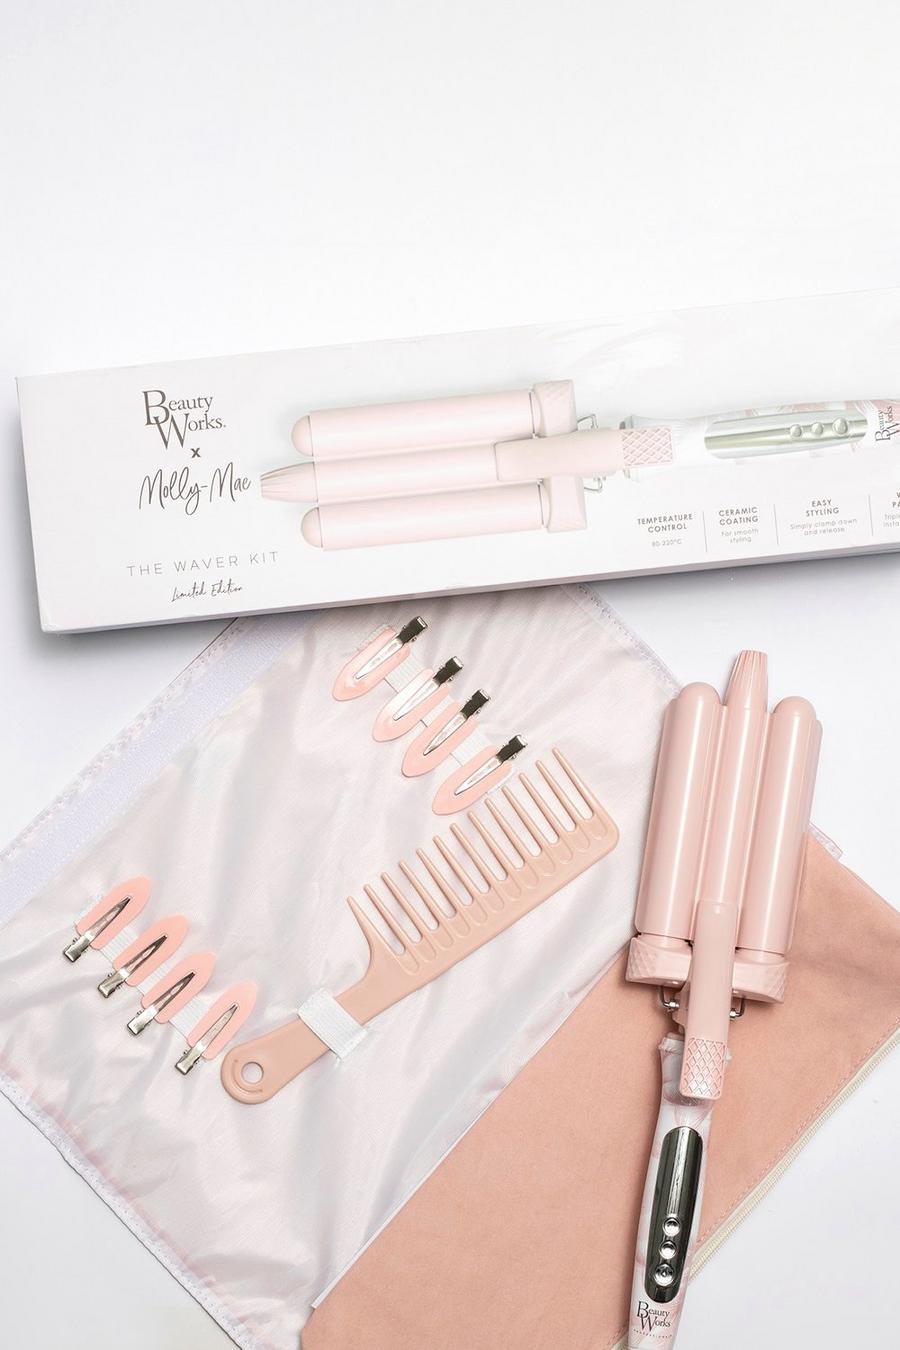 Beauty Works x Molly Mae - Kit Waver, Rose pink